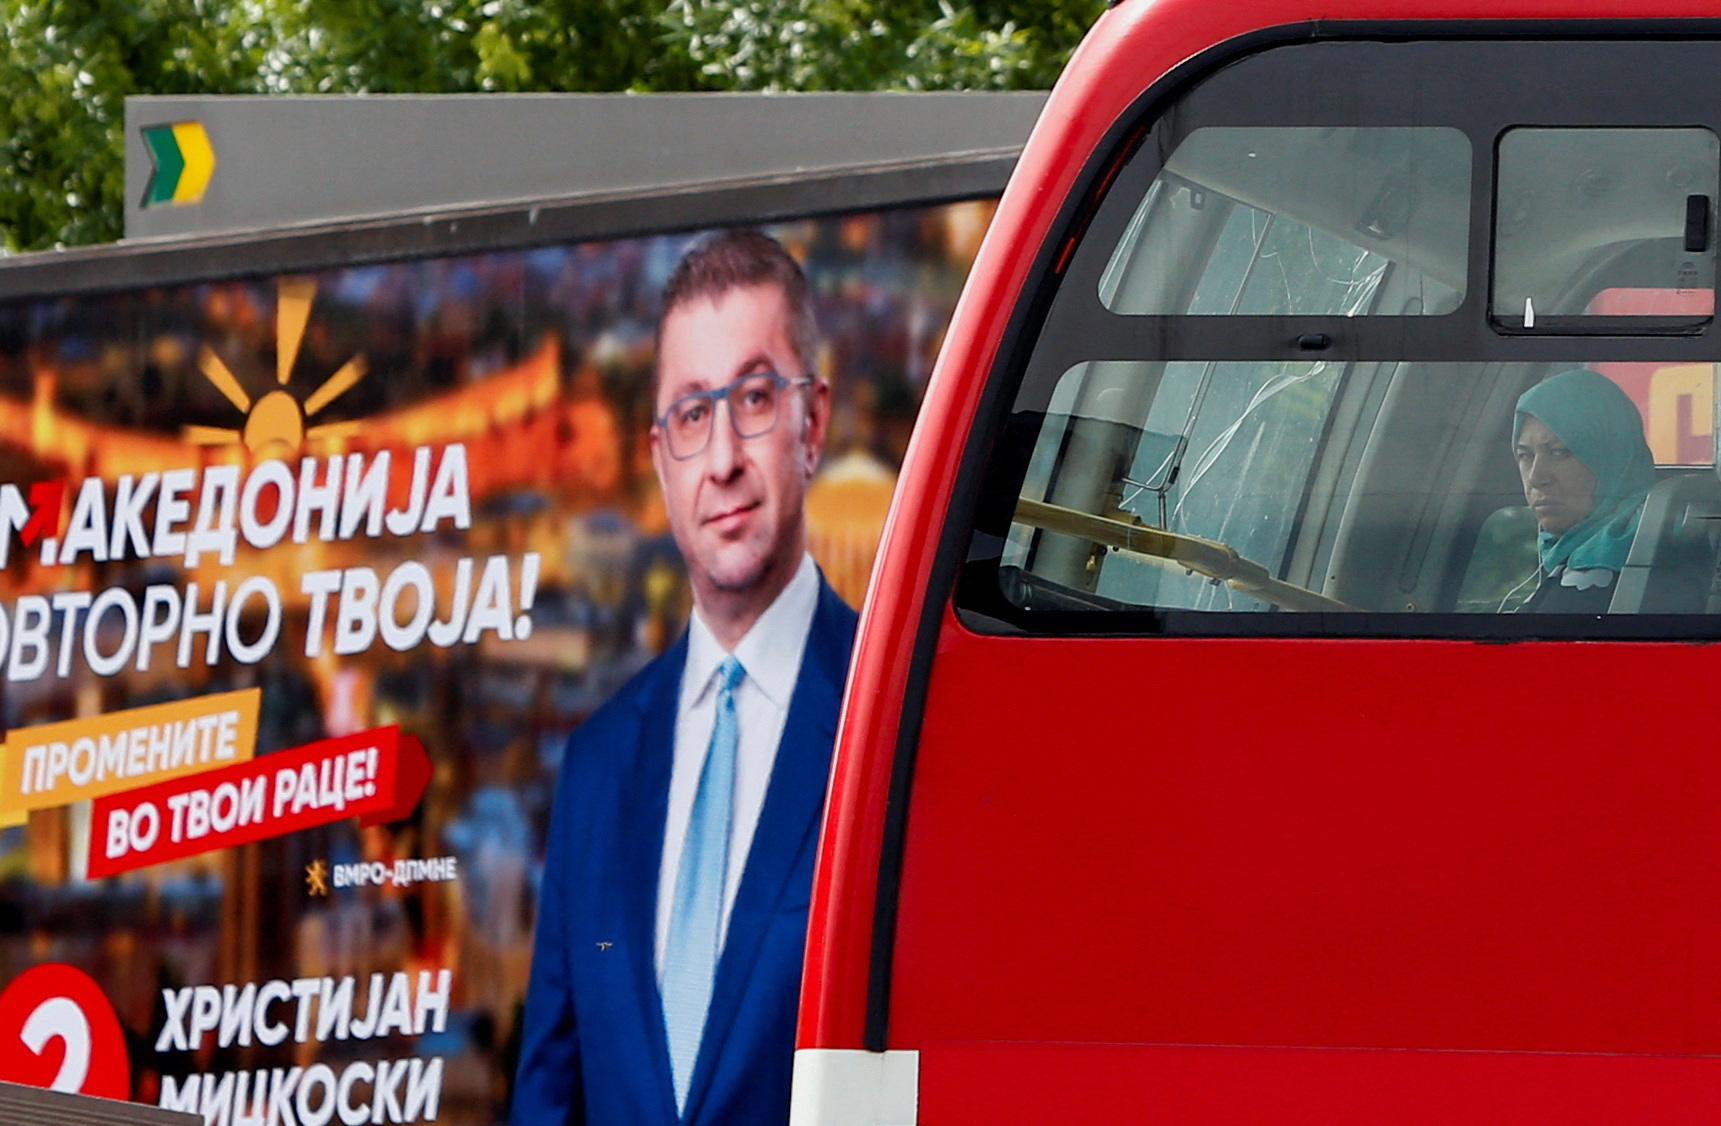 A view shows a campaign billboard for the upcoming parliamentary and presidential elections in Skopje